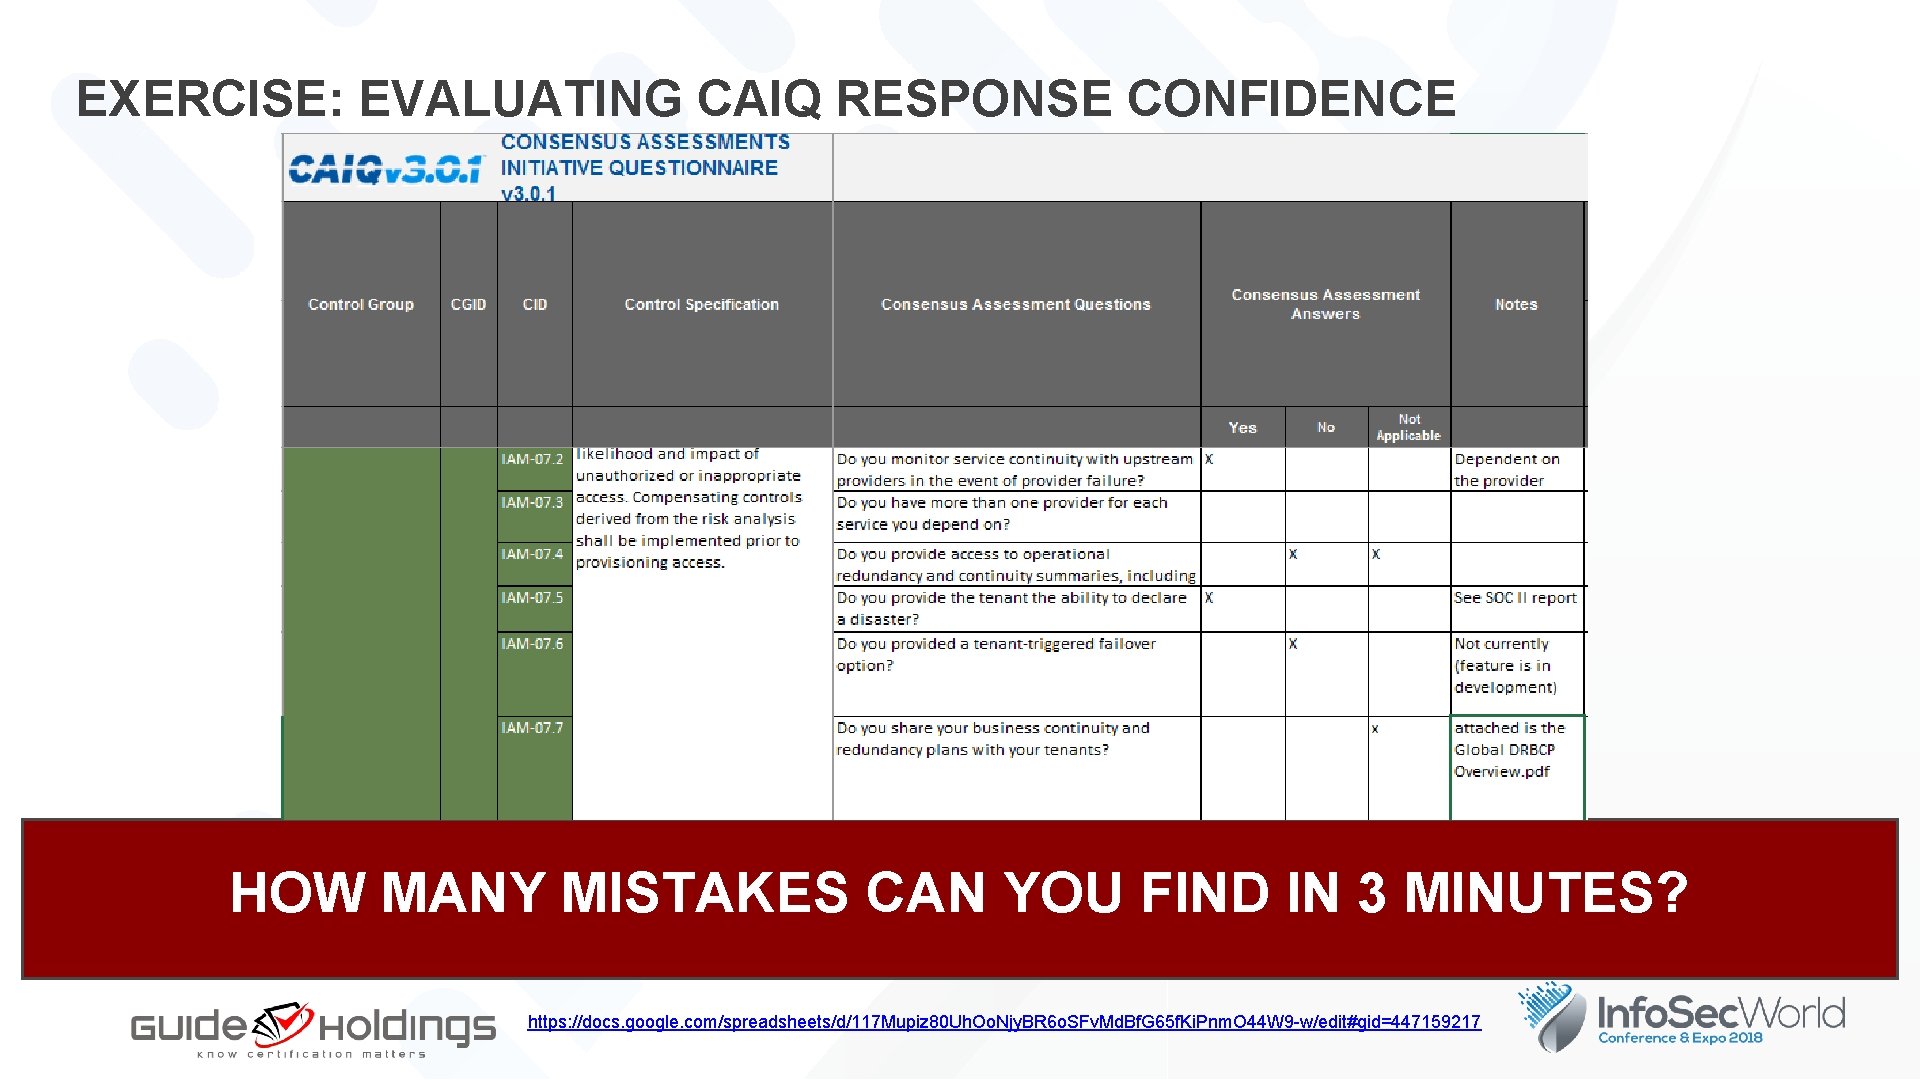 EXERCISE: EVALUATING CAIQ RESPONSE CONFIDENCE HOW MANY MISTAKES CAN YOU FIND IN 3 MINUTES?